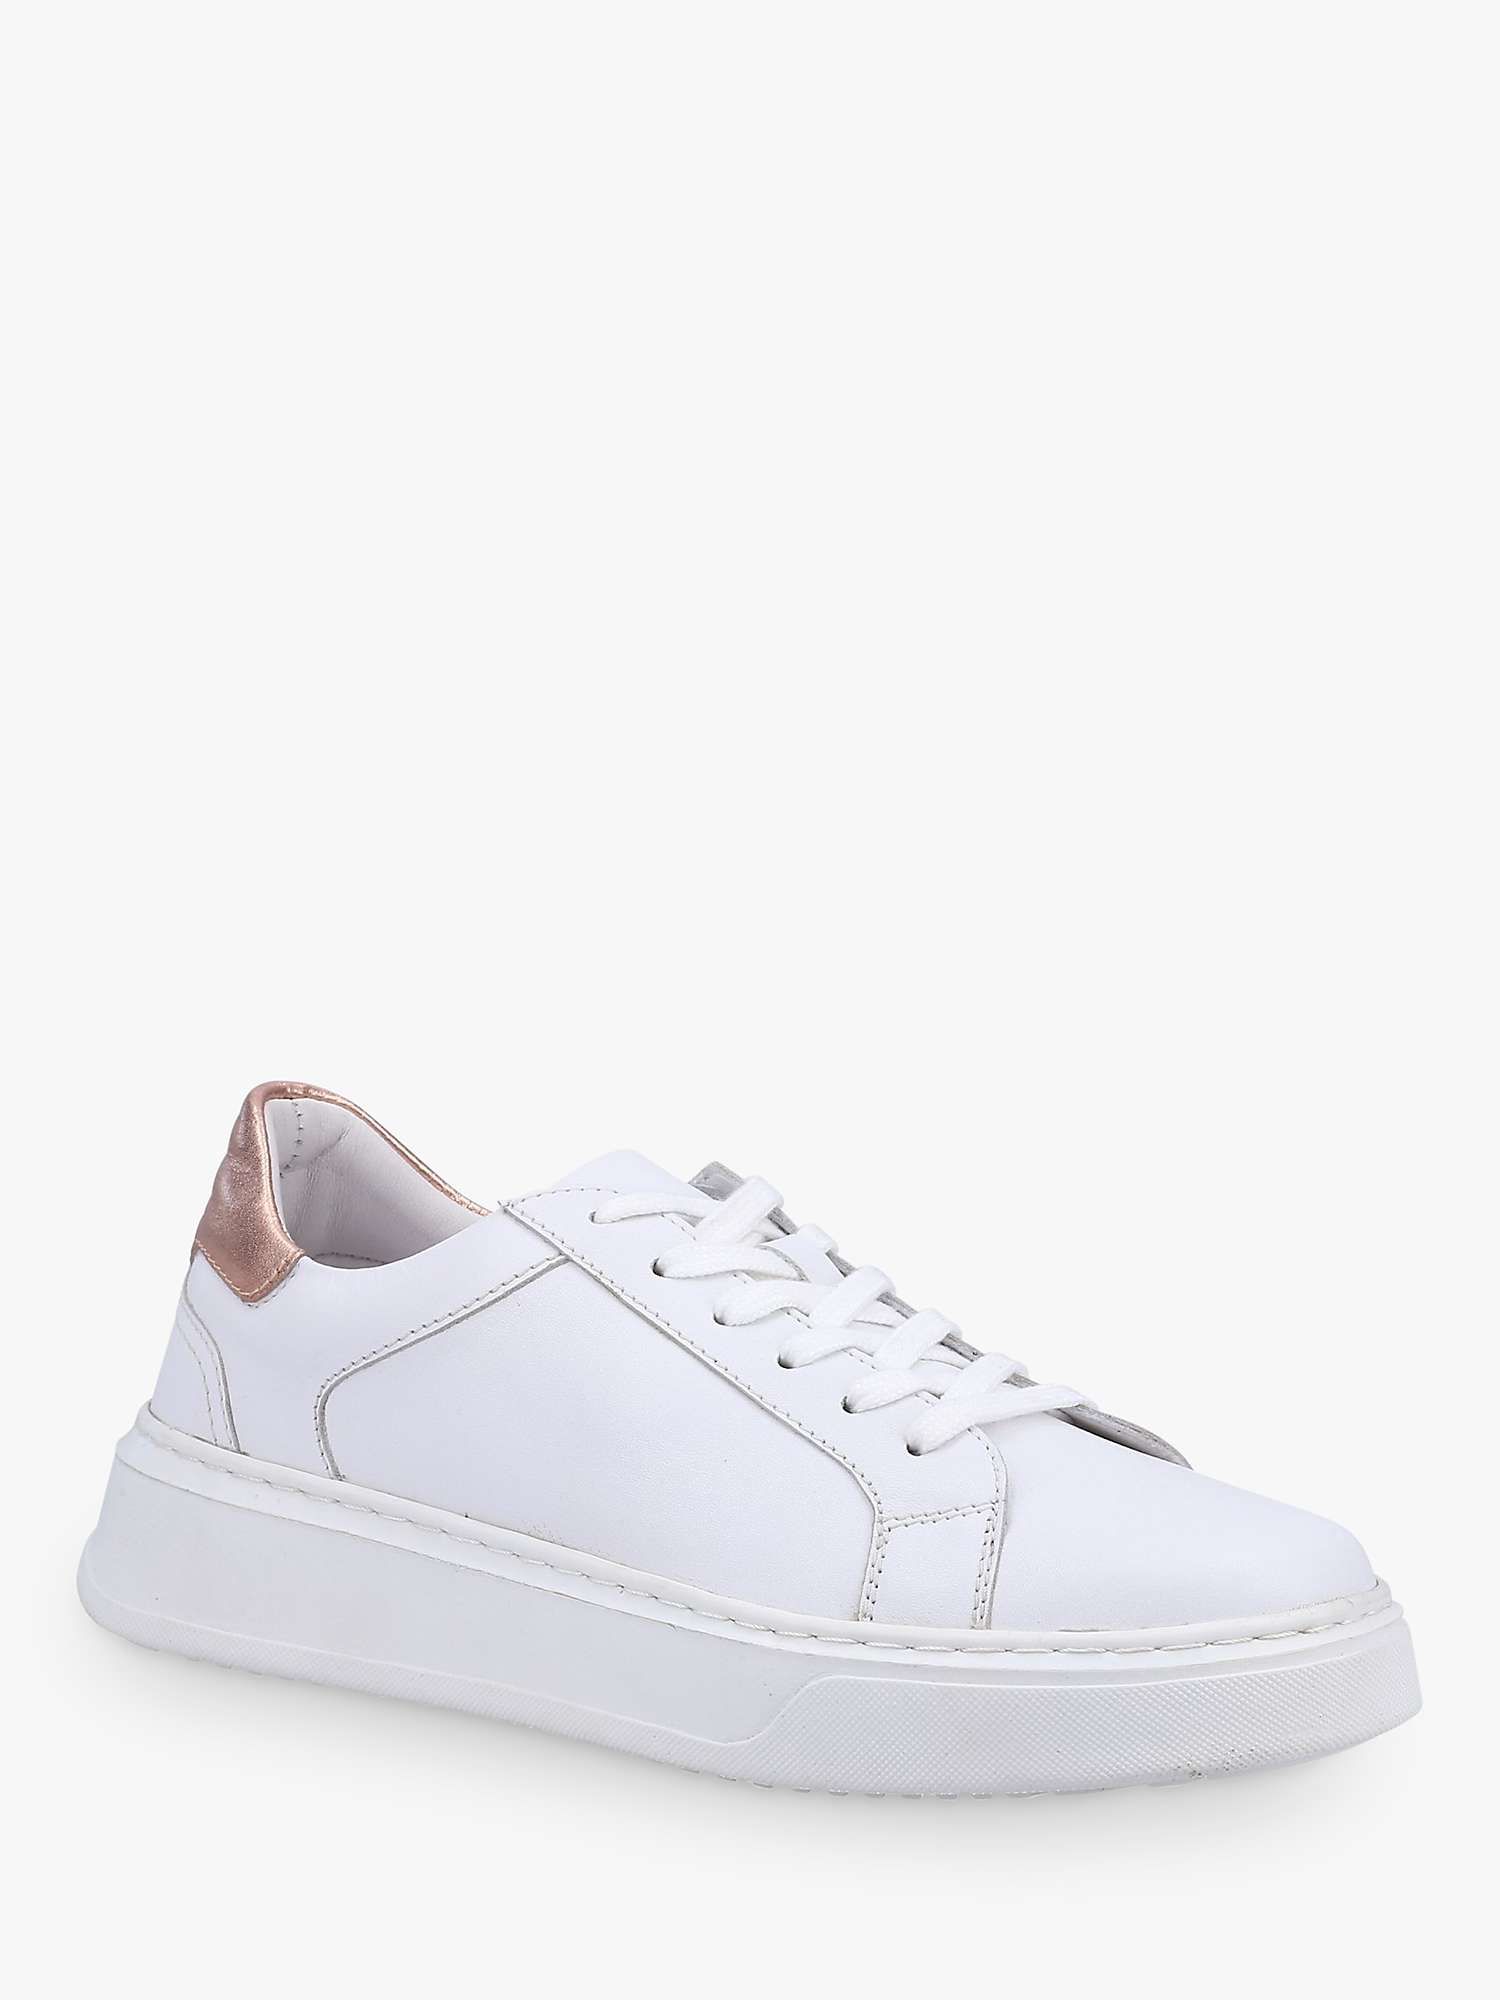 Buy Hush Puppies Camille Lace-Up Leather Trainers Online at johnlewis.com